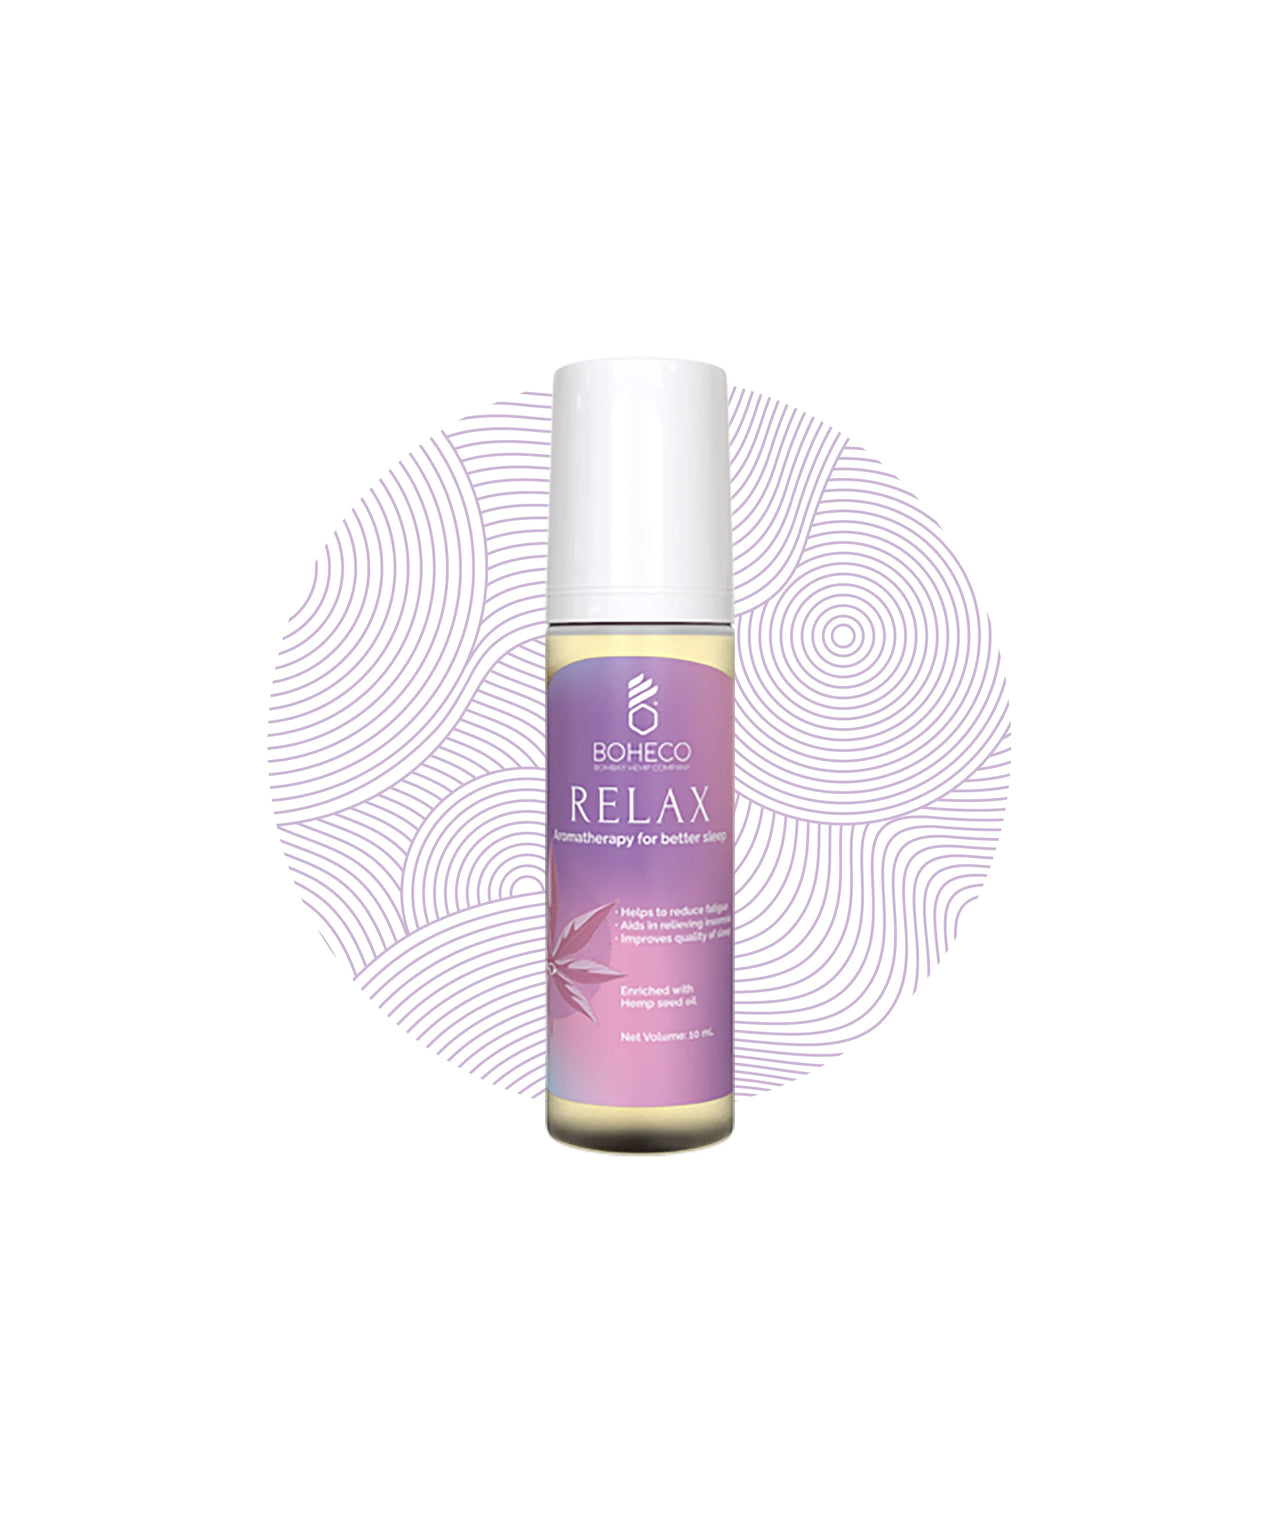 Boheco Relax Aromatherapy Roll-On for Better Sleep - 10ml